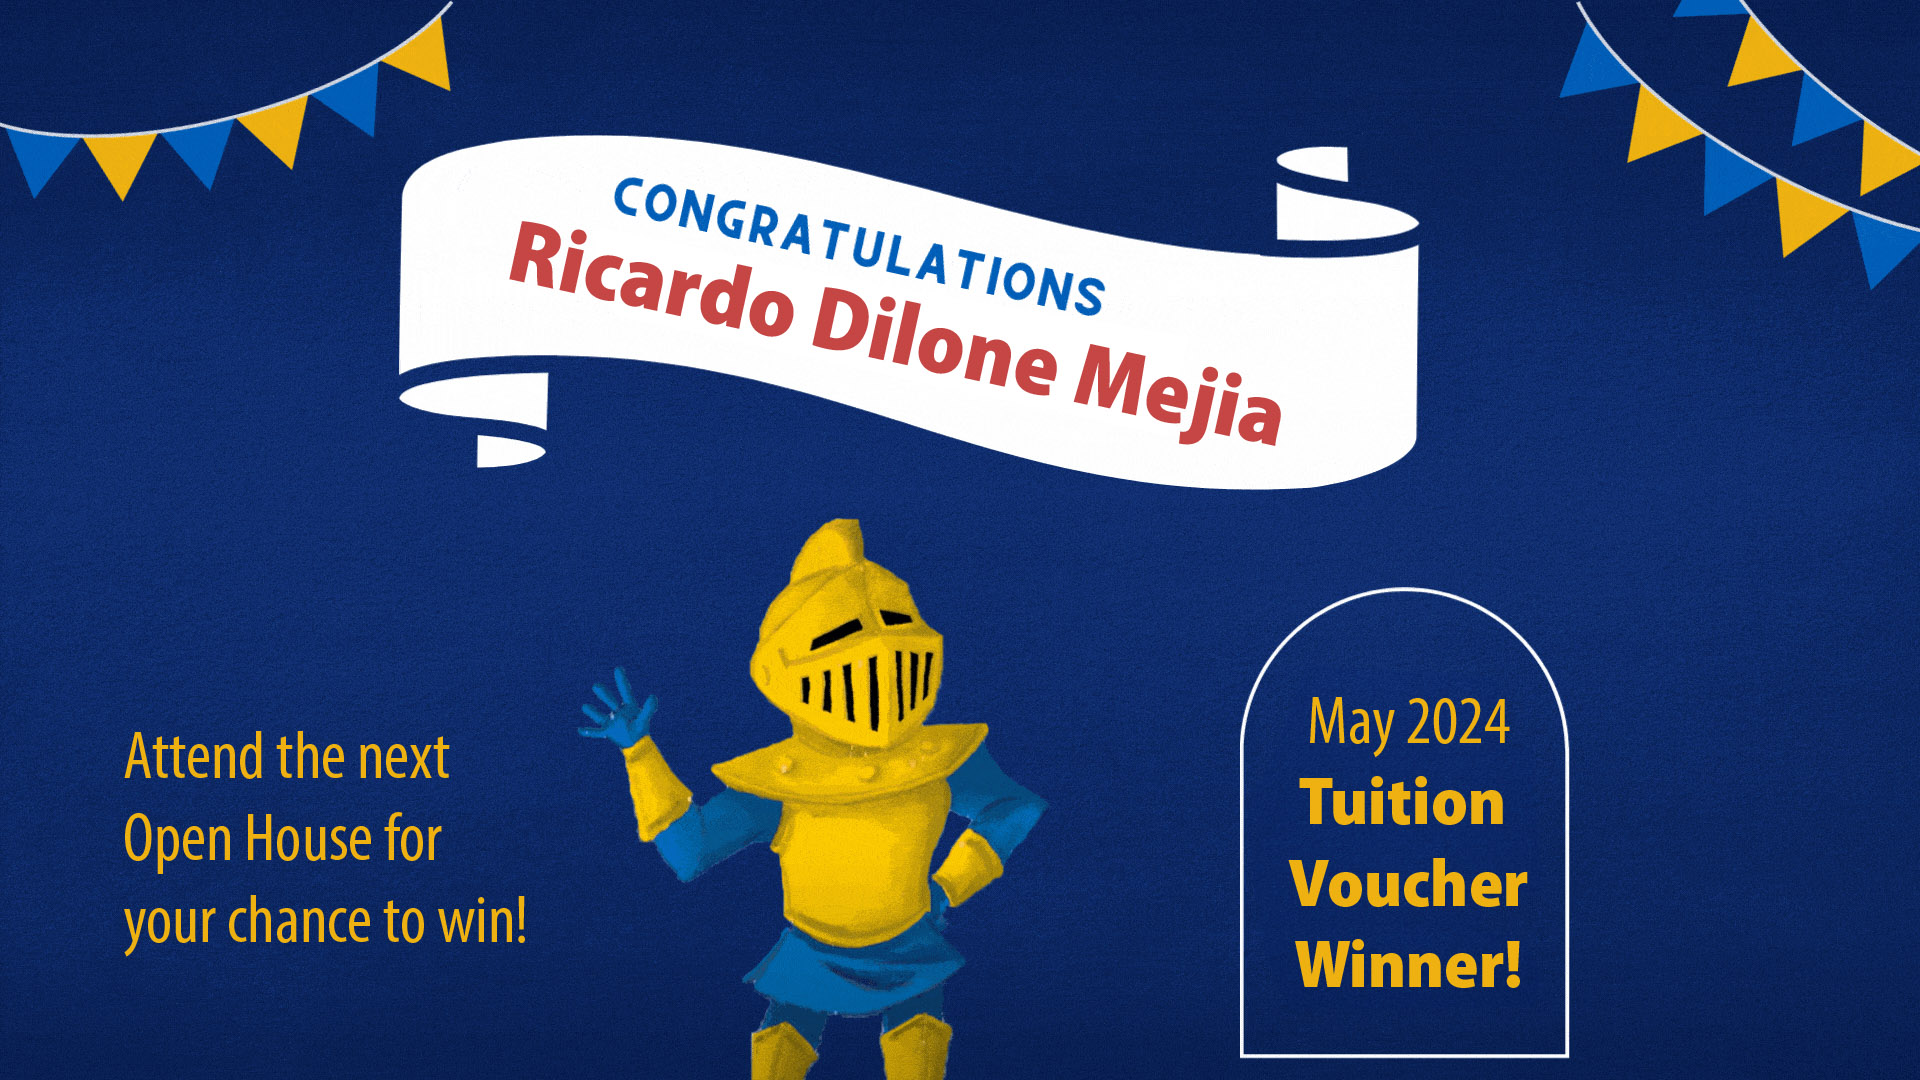 A graphic of the NECC Knight waving with the text congratulations Ricardo Dilone Mejia